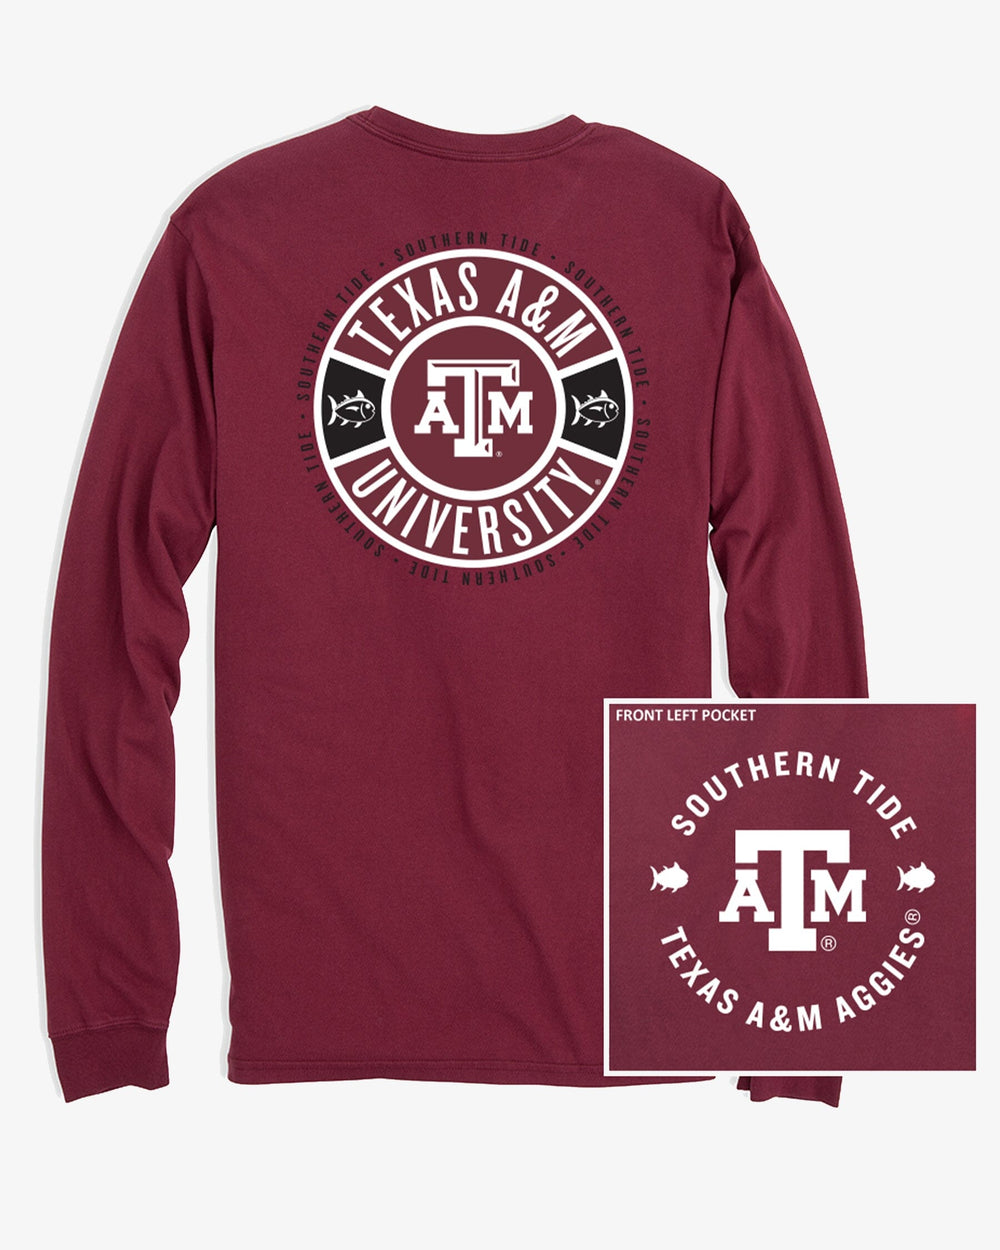 The front view of the Southern Tide Texas A&M Aggies Ring Badge T-Shirt by Southern Tide - Chianti